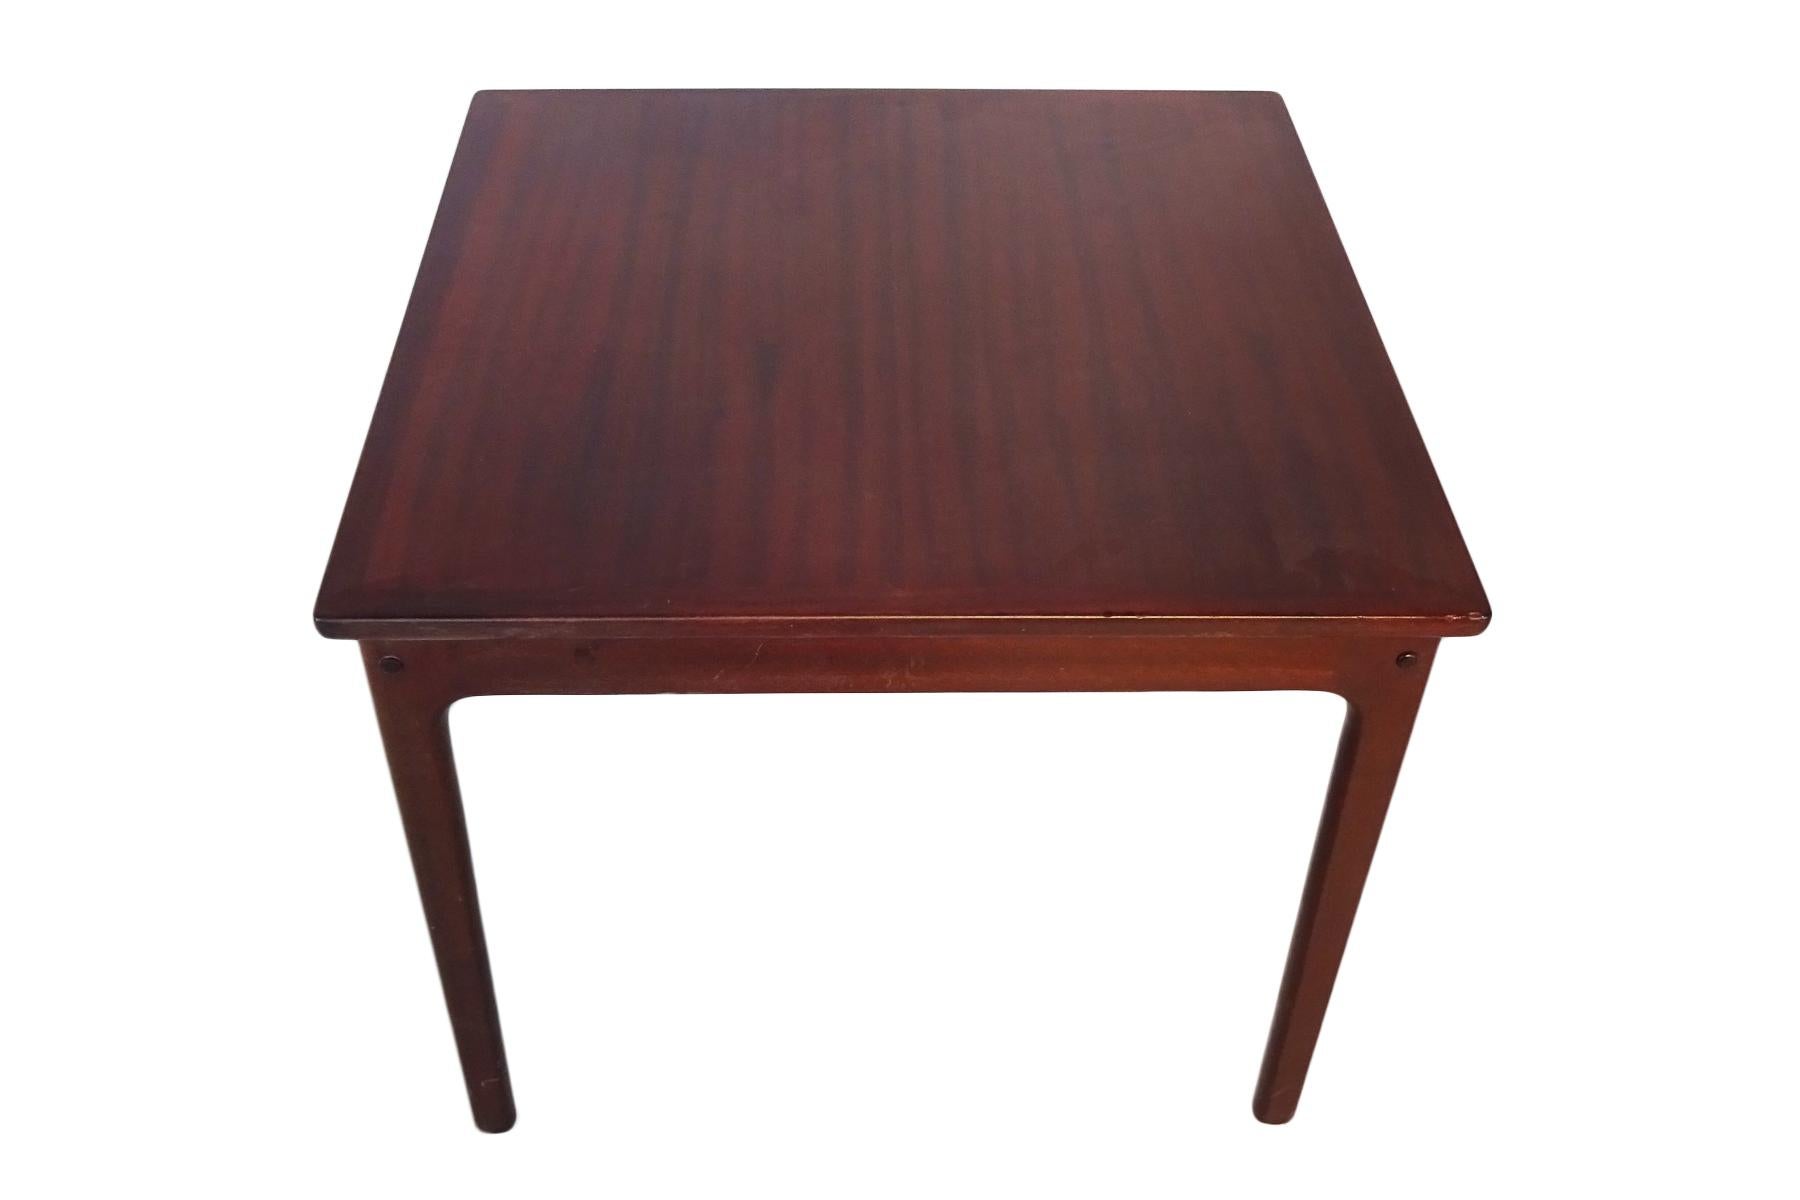 Danish midcentury mahogany coffee or side table by Ole Wanscher for Poul Jeppesen Møbelfabrik.

Born in Copenhagen in 1903, Danish architect and designer Ole Wanscher played a pivotal part in Denmark's Mid-Century Modern movement. His simple but